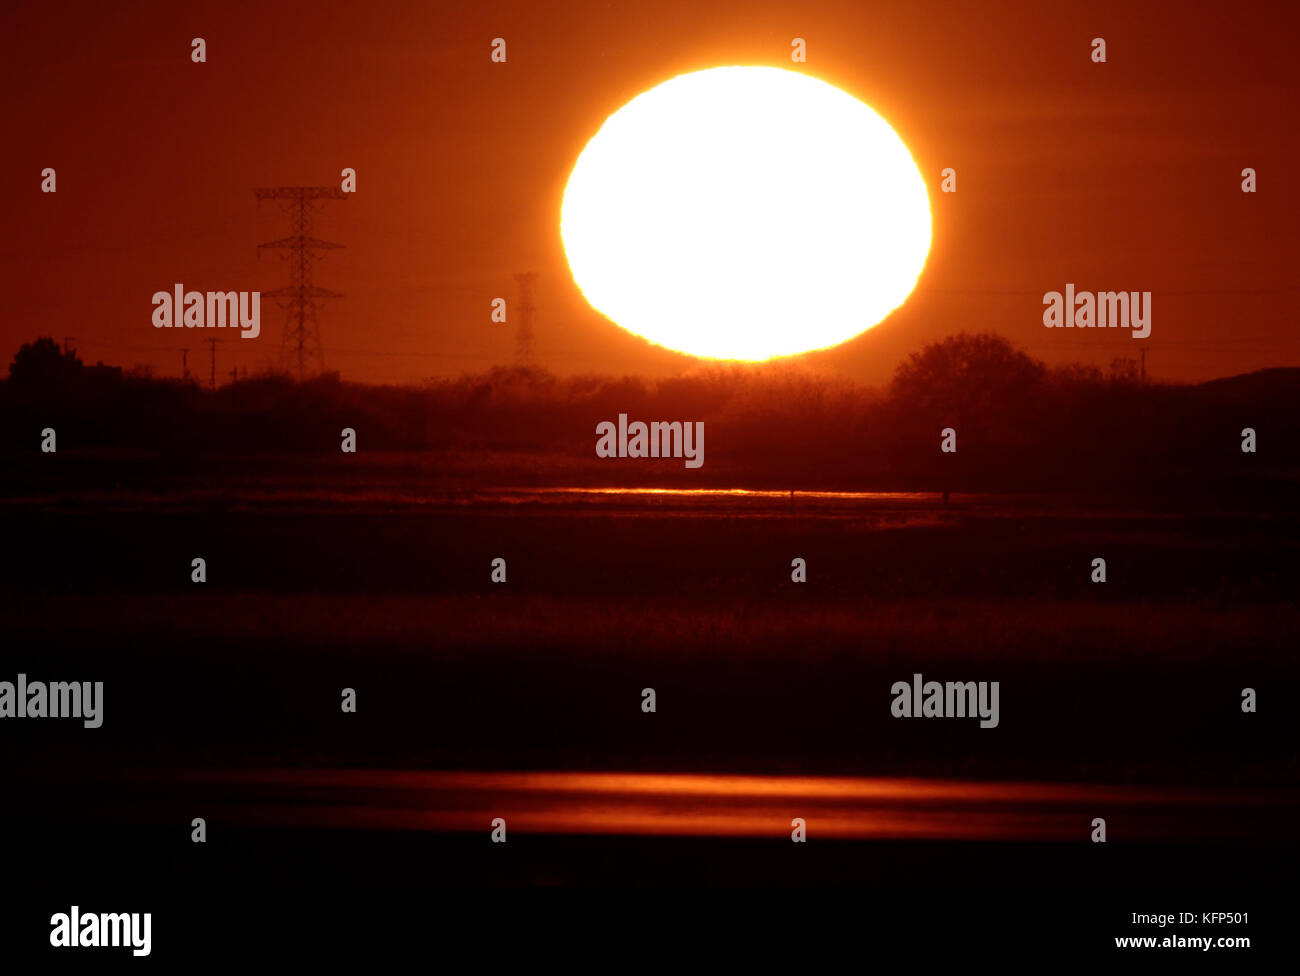 Sun seen at sunset on the horizon to the west of the capital of Sonora, located in the desert northwest of Mexico.    The Sun is a star of spectral type G2 which lies in the center of the solar system and is the largest source of electromagnetic radiation of this planetary system. Earth and other bodies orbit around the sun.    Distance to Earth: 149,600,000 km  Radio: 696,000 km  Surface temperature: 5,778 K  Mass: kg 1,989E30  Absolute size: 4.83  Magnitude: -26.74 Stock Photo